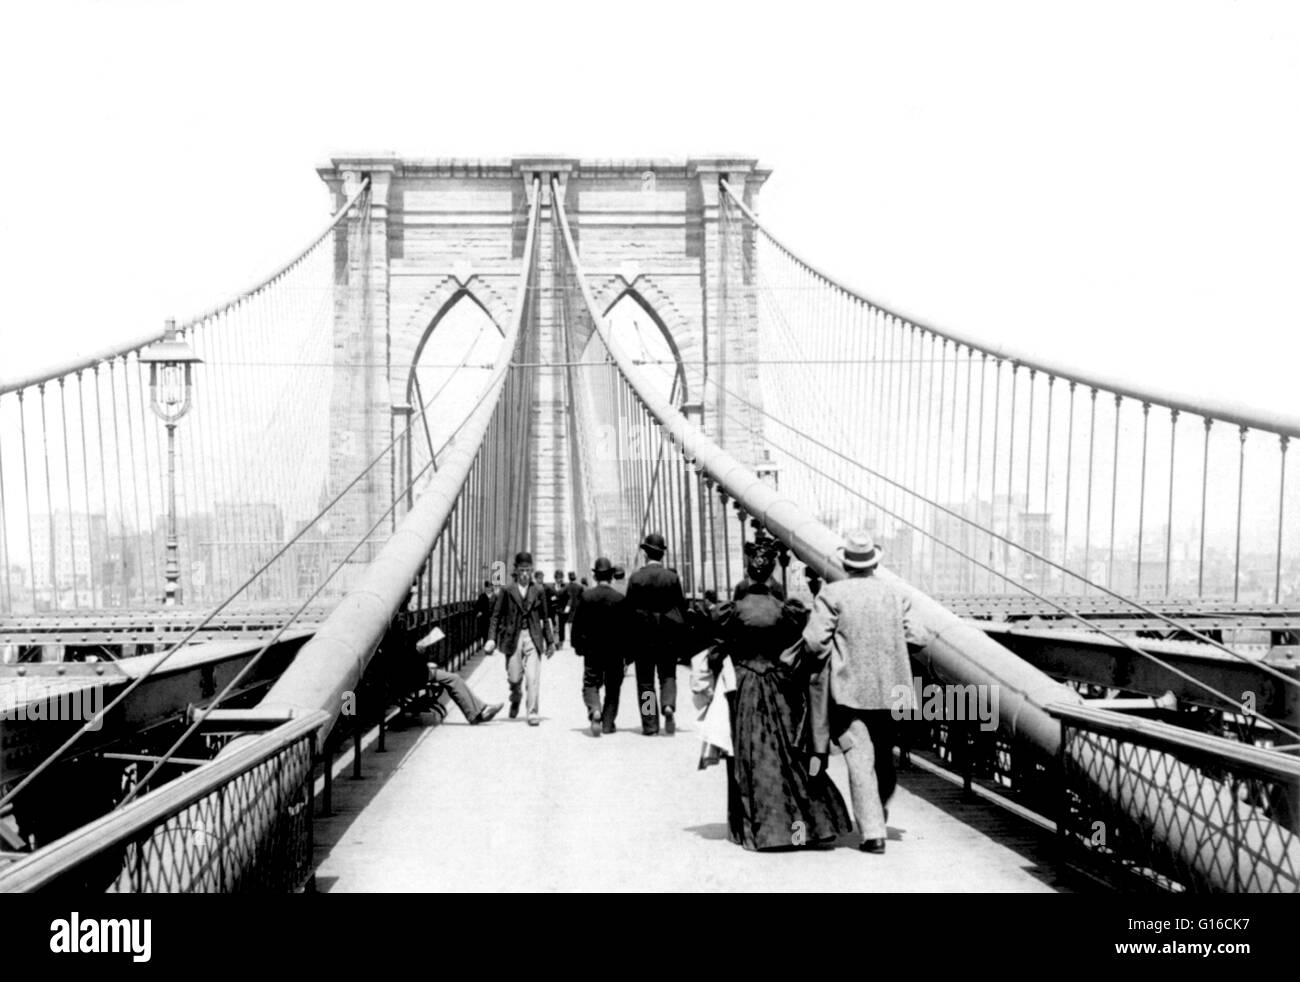 View looking across the Brooklyn Bridge, N.Y.C. with people walking in both directions, 1894. The Brooklyn Bridge is one of the oldest suspension bridges in the United States. Completed in 1883, it connects the boroughs of Manhattan and Brooklyn by spanni Stock Photo